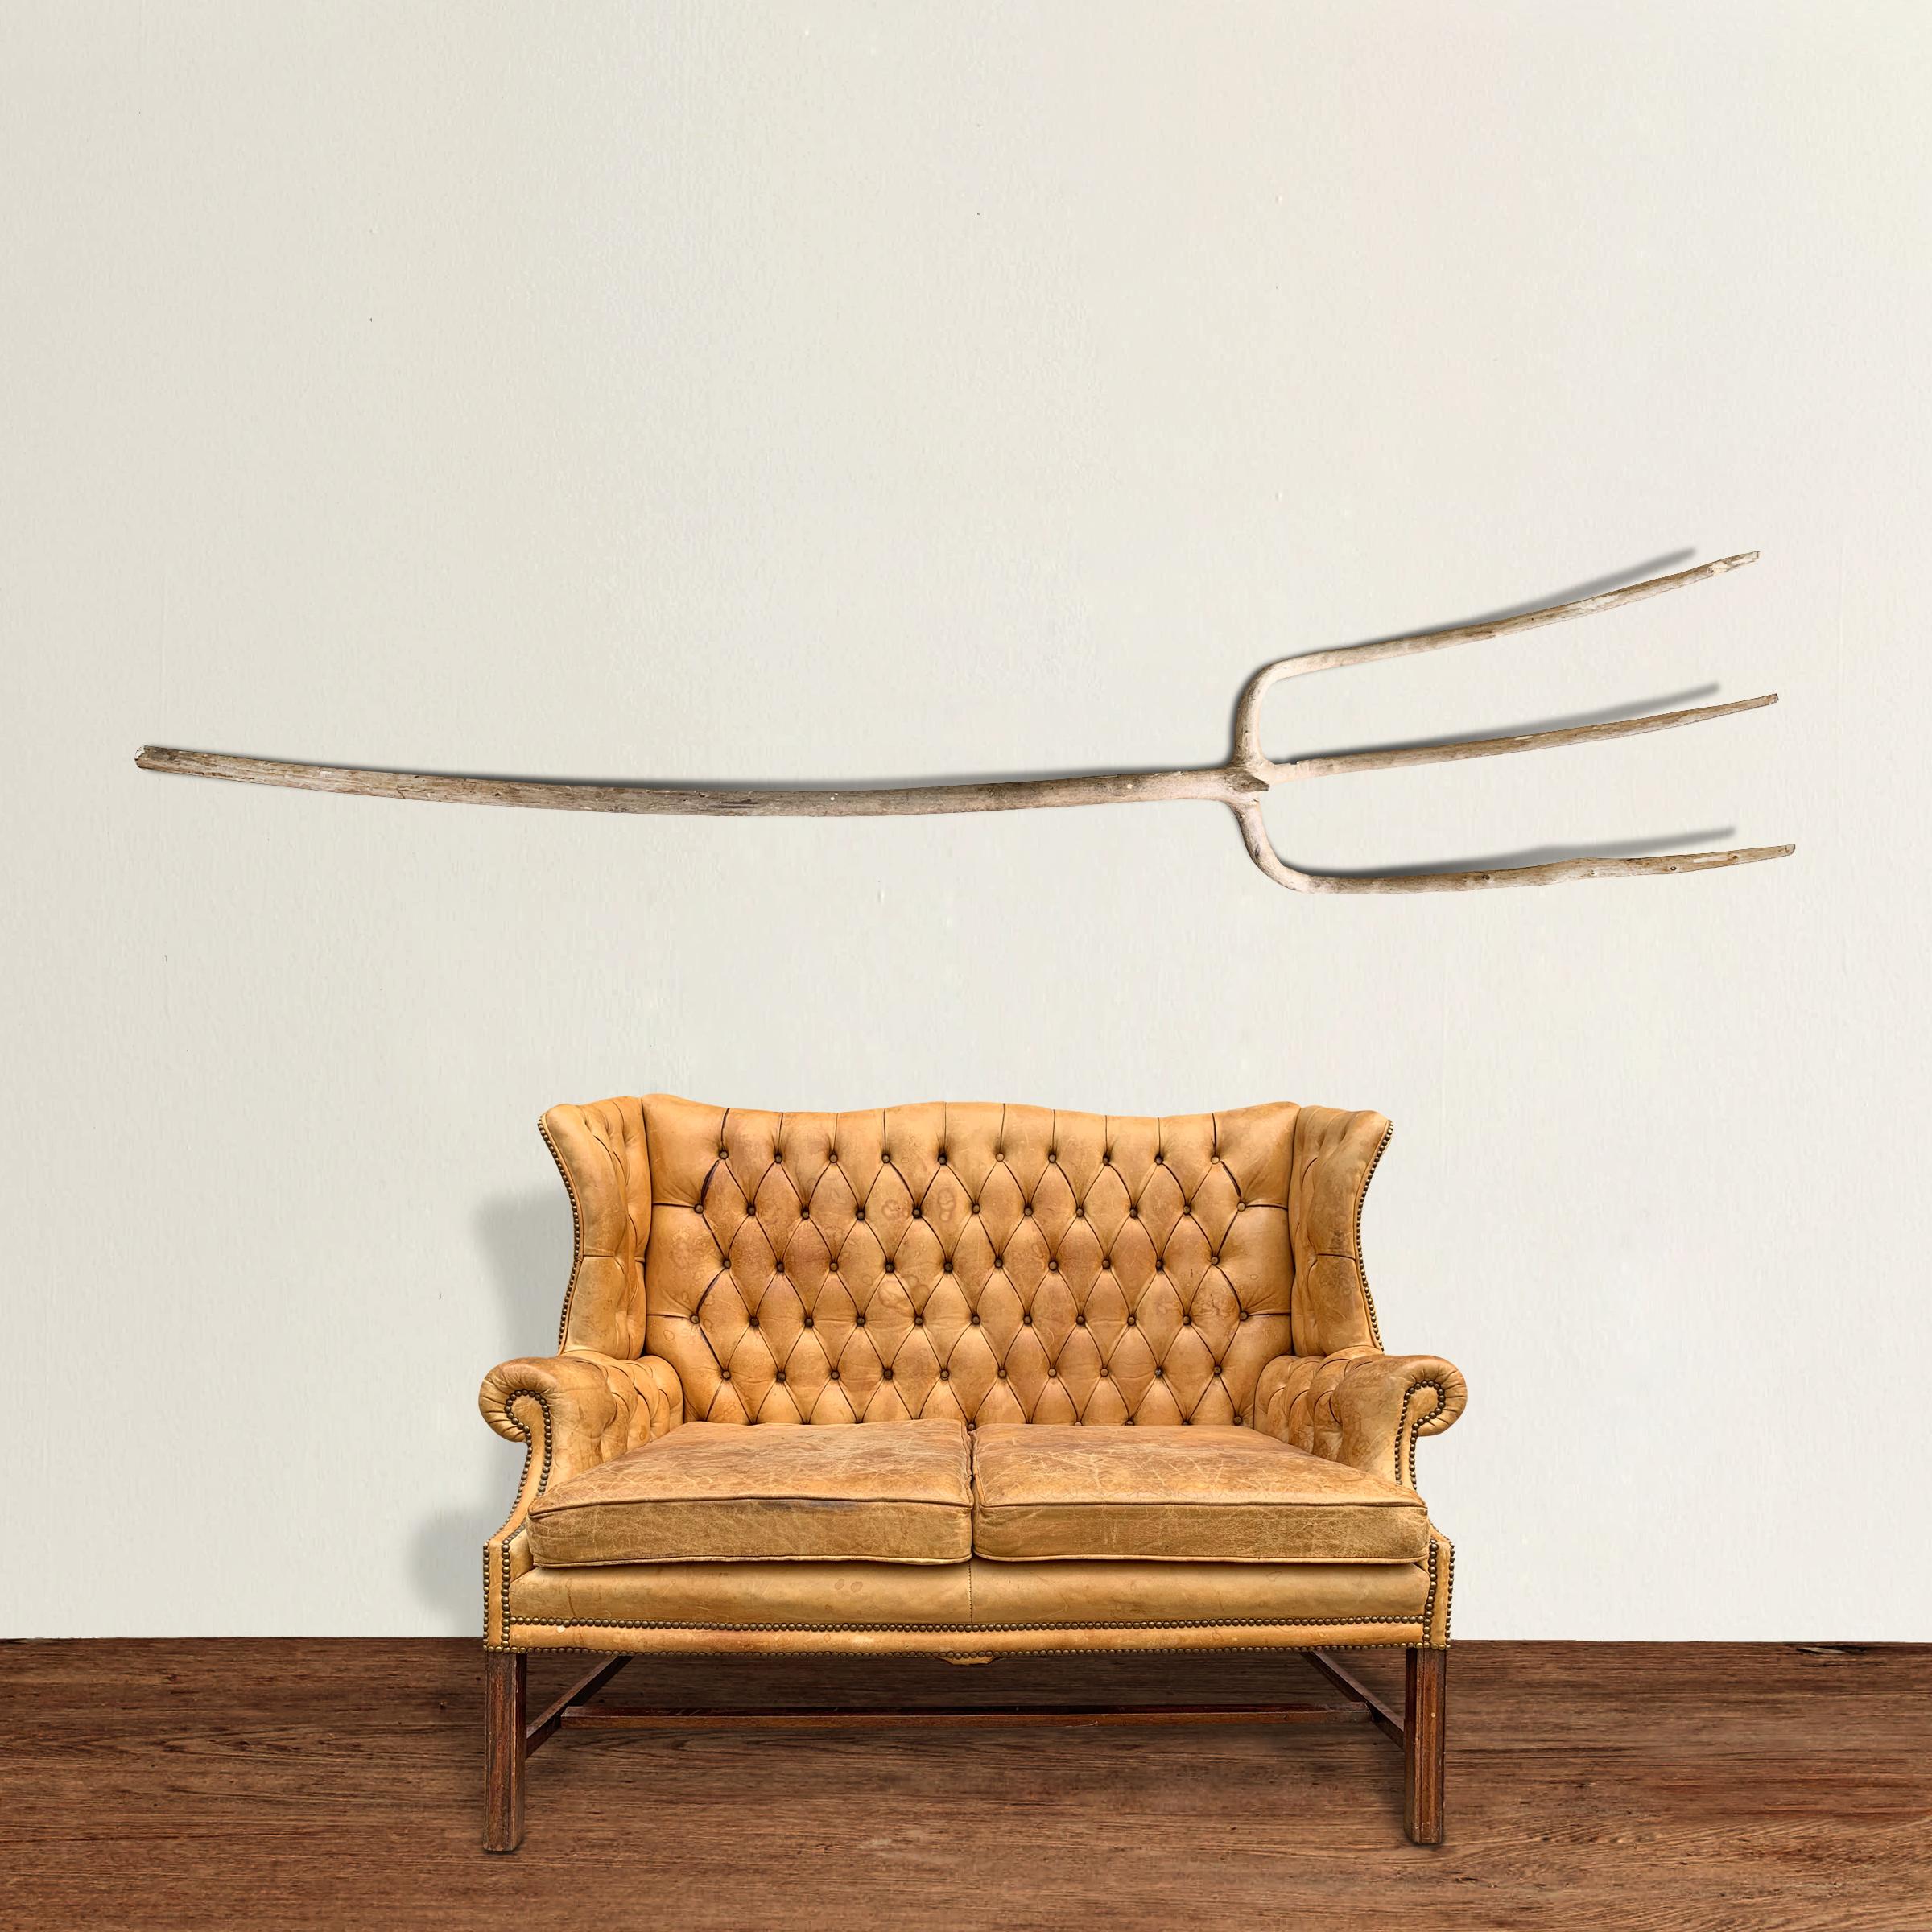 A wonderfully sculptural massive 19th century French pitchfork with three tines, made from a trained fruitwood tree. Pitchforks like these are made from trees that have been trained for several years to grow into the desired form, and then cut and